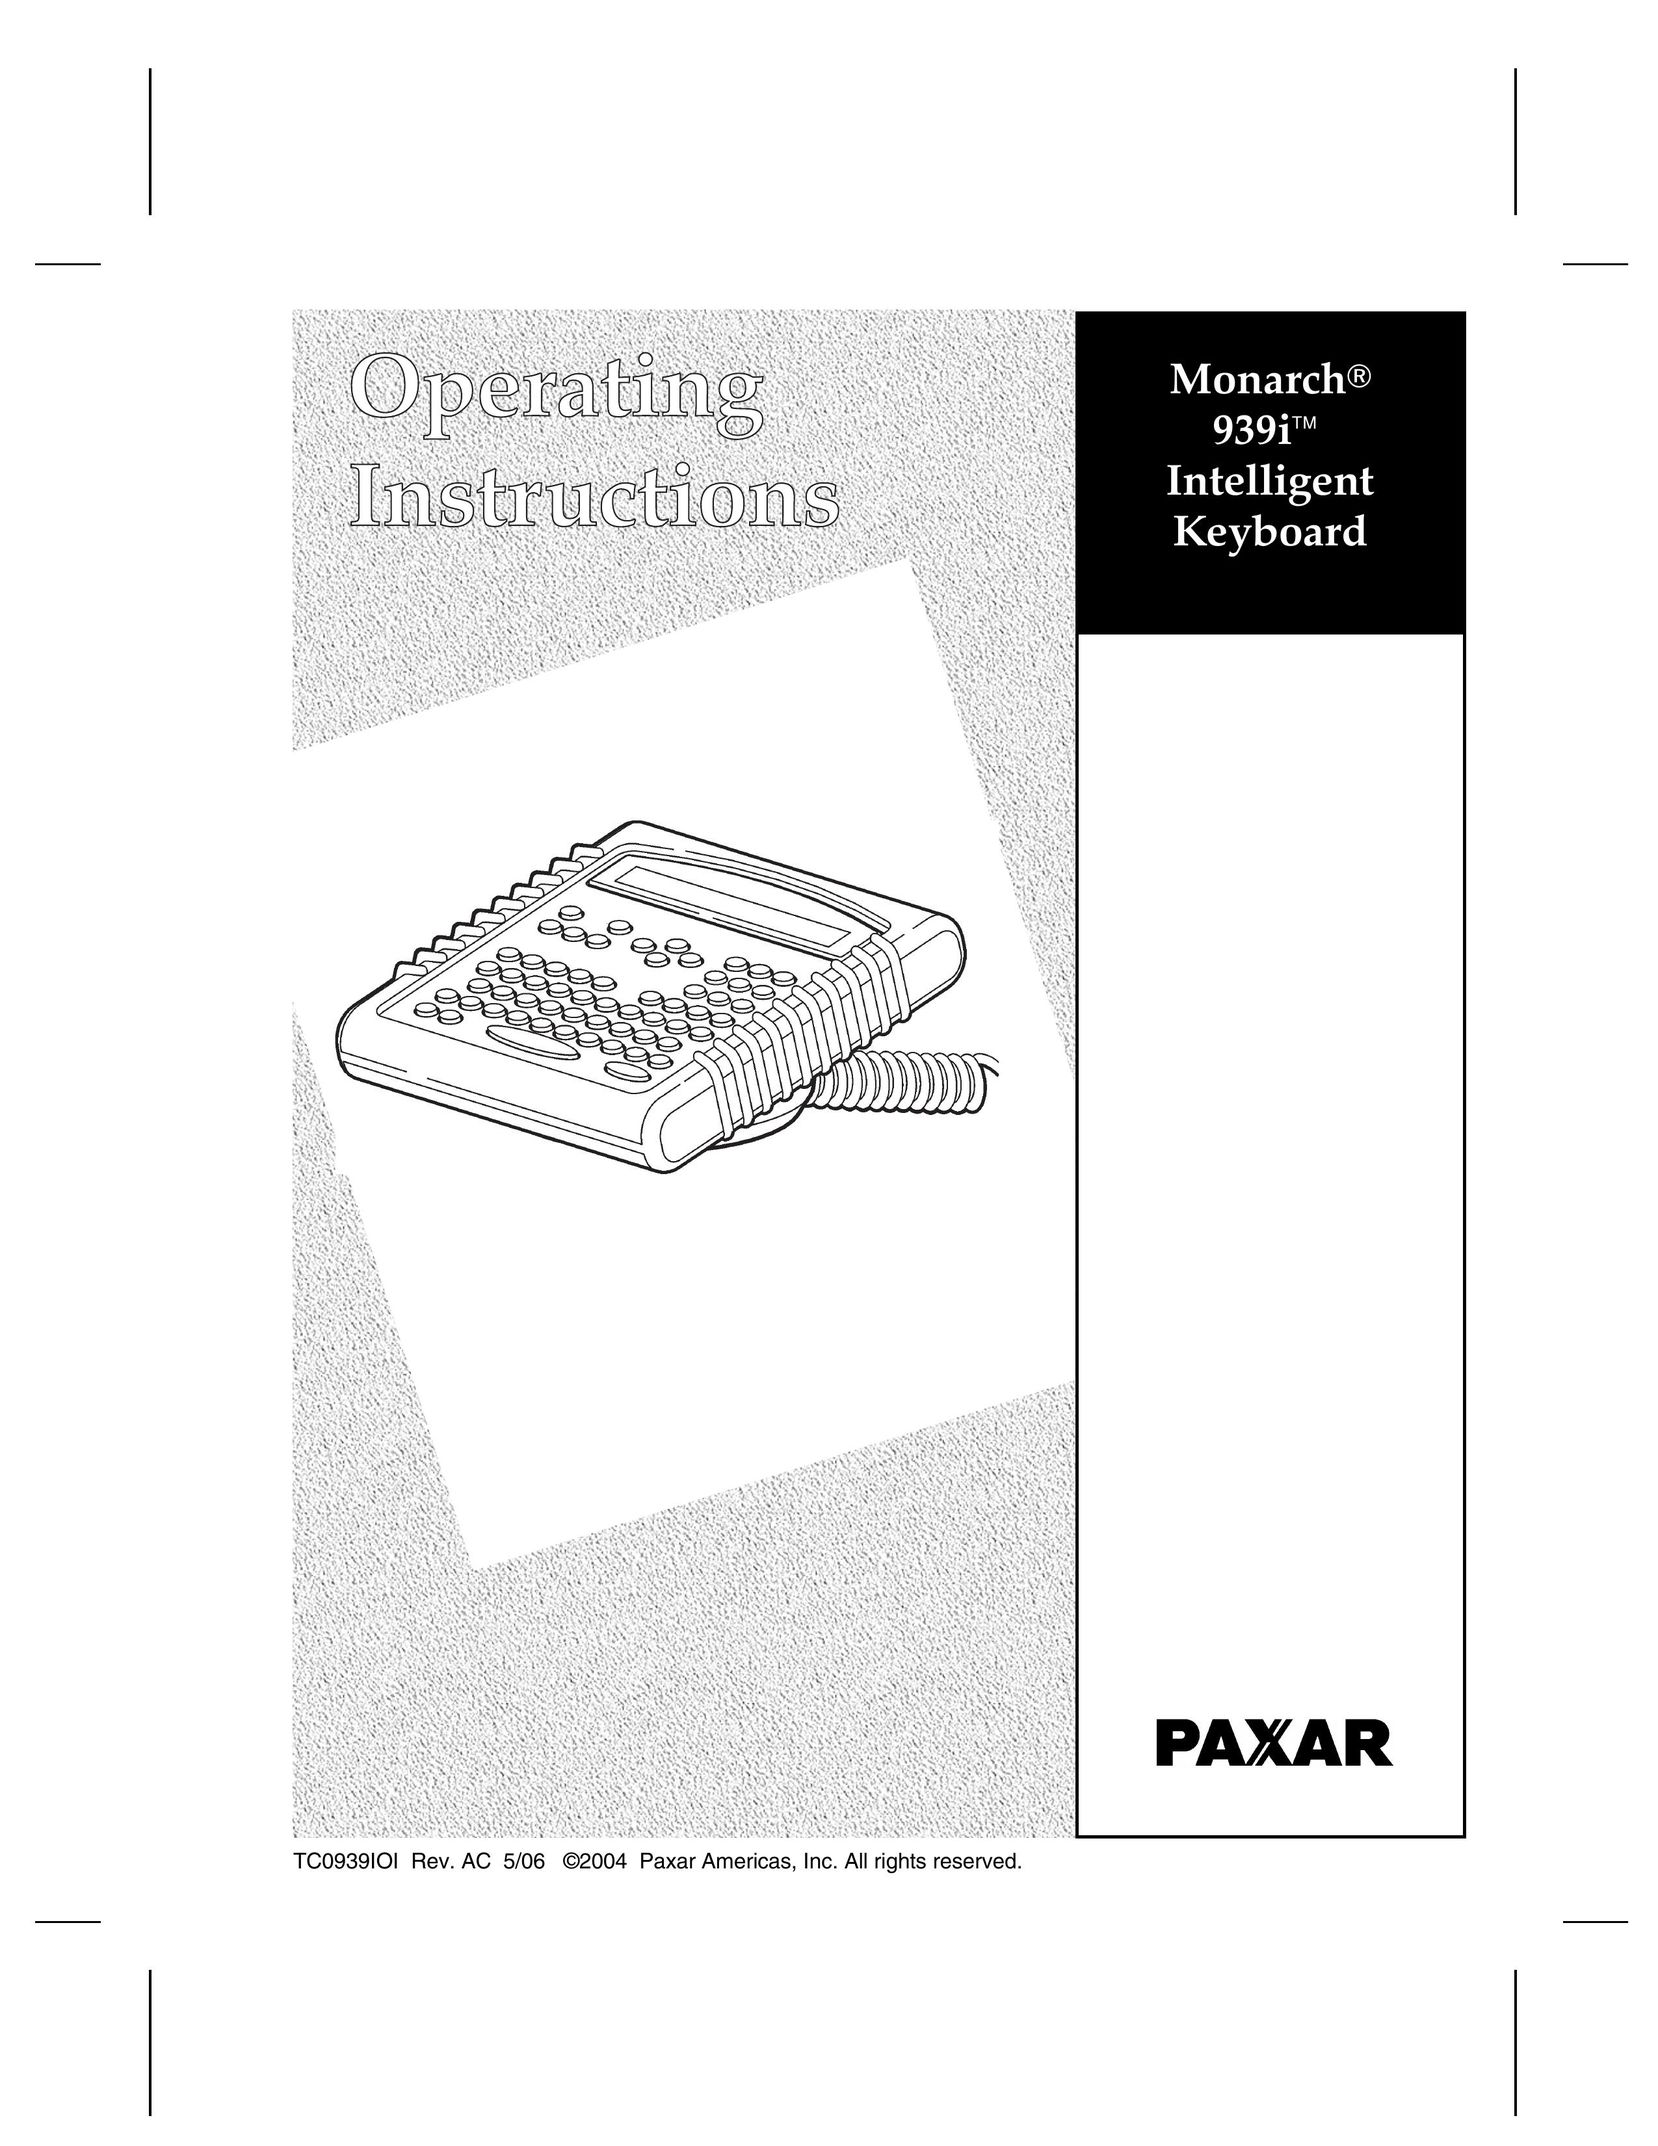 Paxar 939i Mouse User Manual